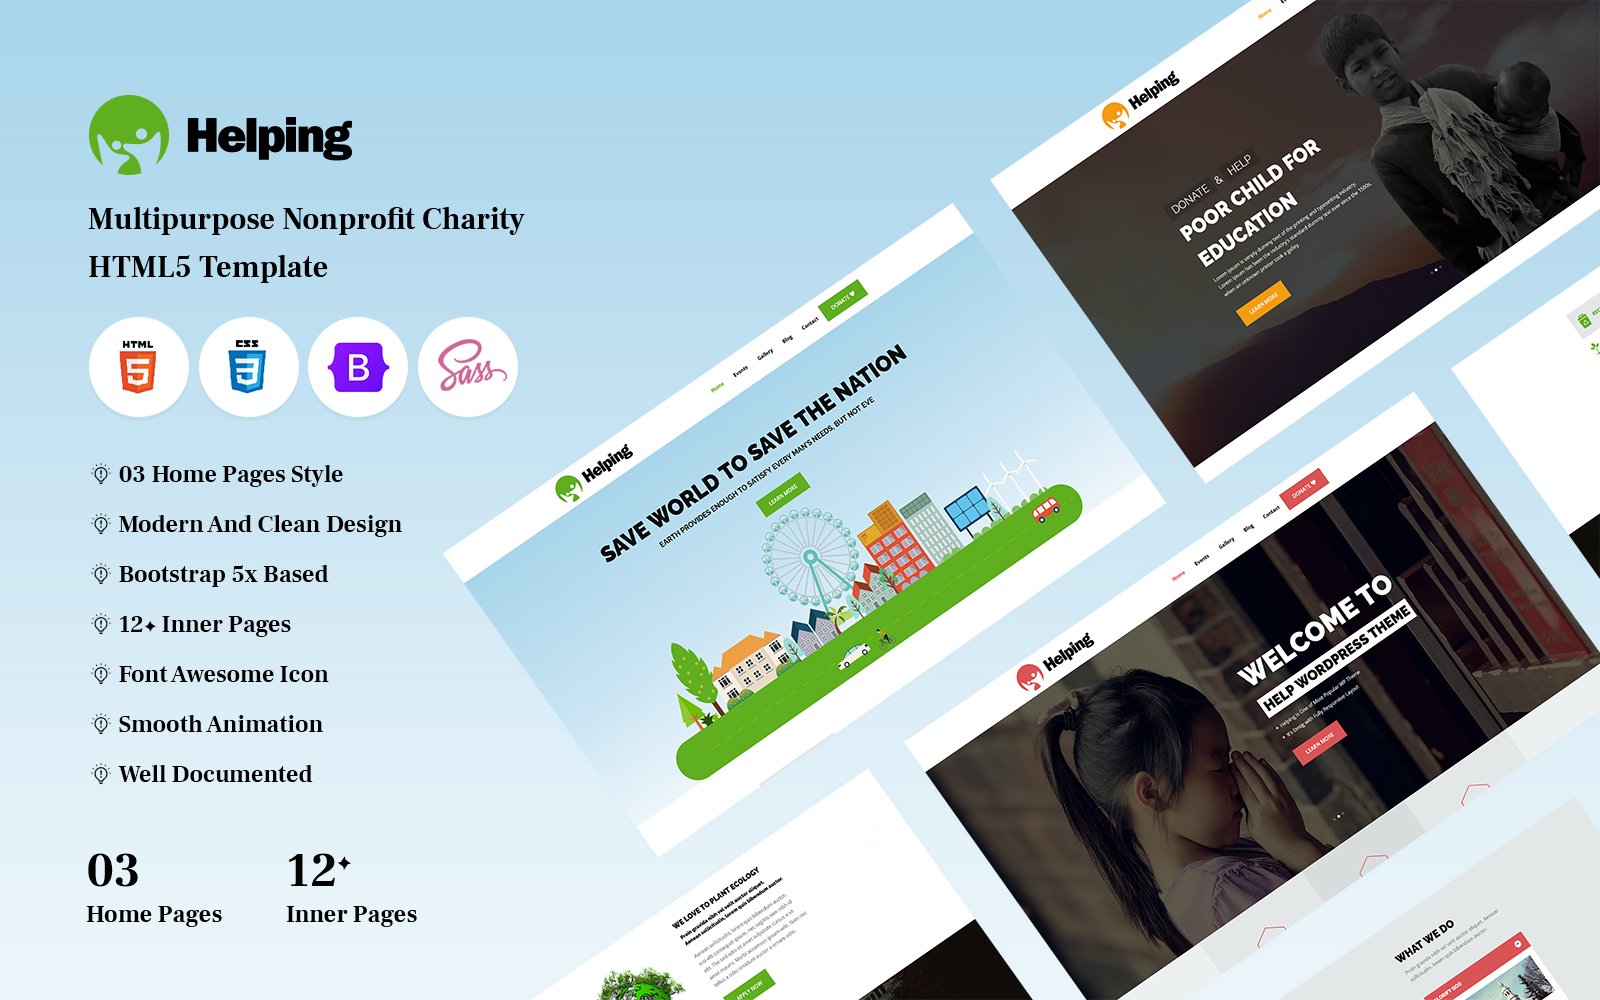 Kit Graphique #293173 Charity Charity Divers Modles Web - Logo template Preview